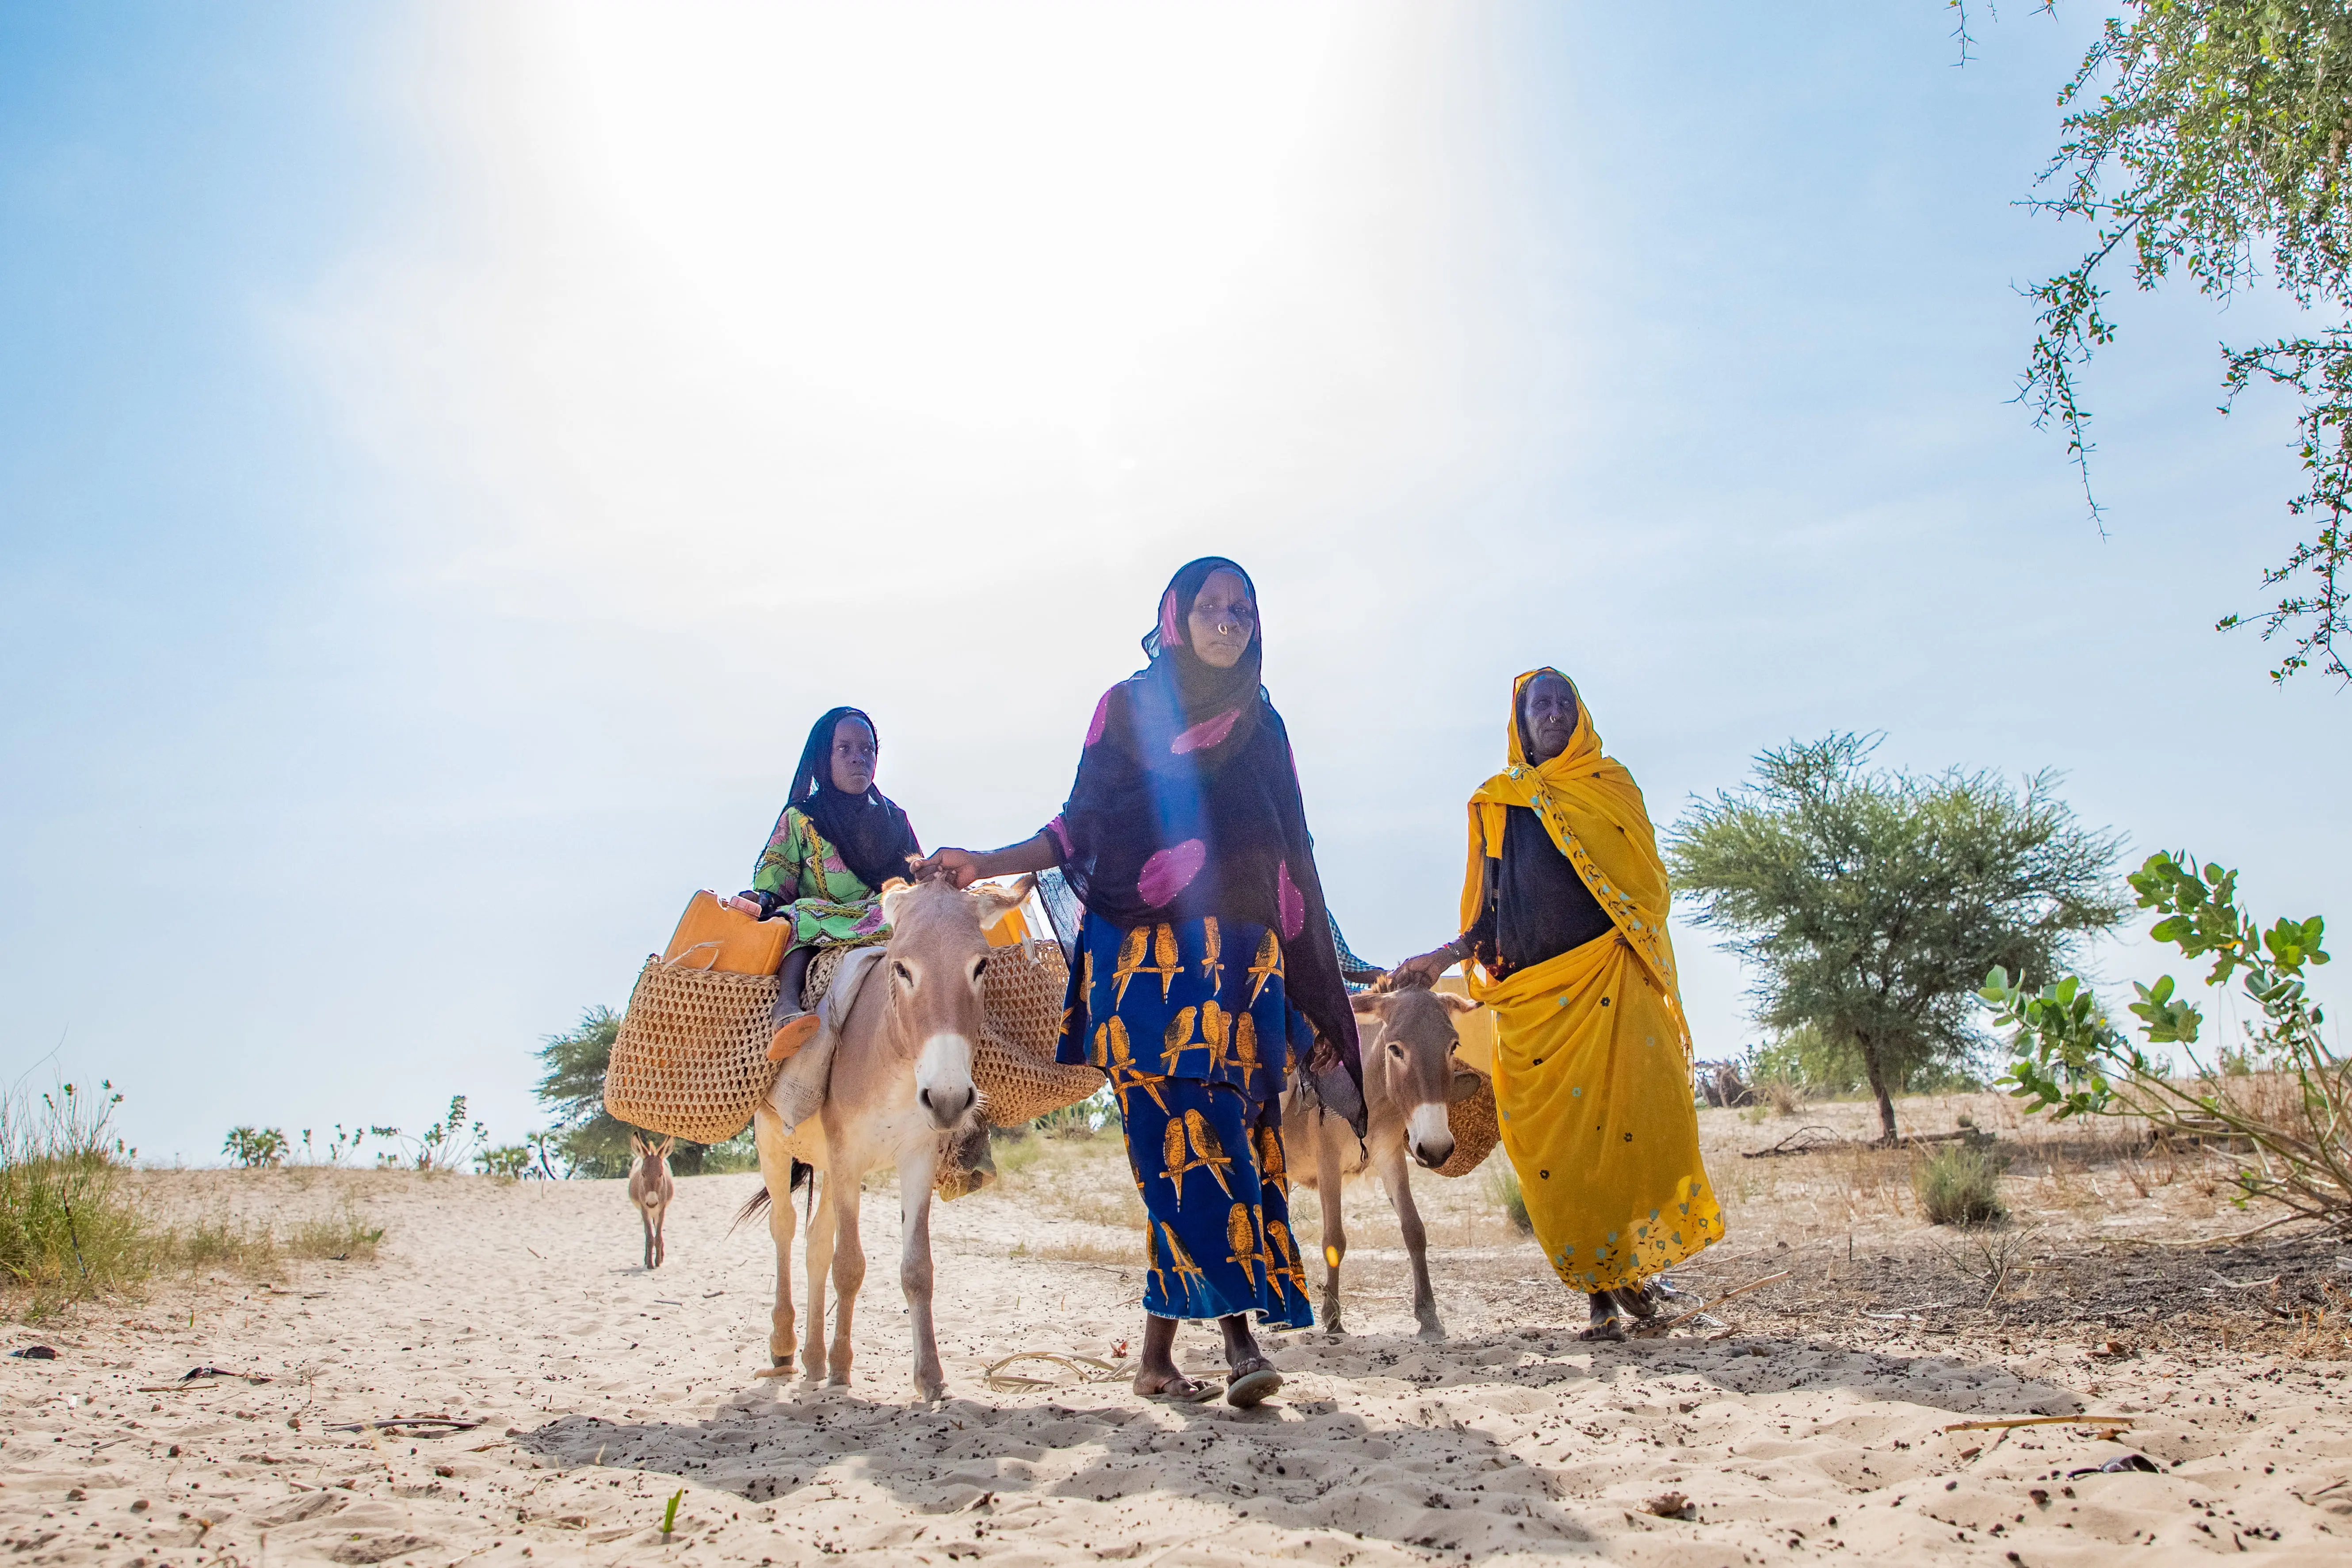 Women travel for hours to gather water in Chad, a country hit hard by climate change as well as several other humanitarian crises.